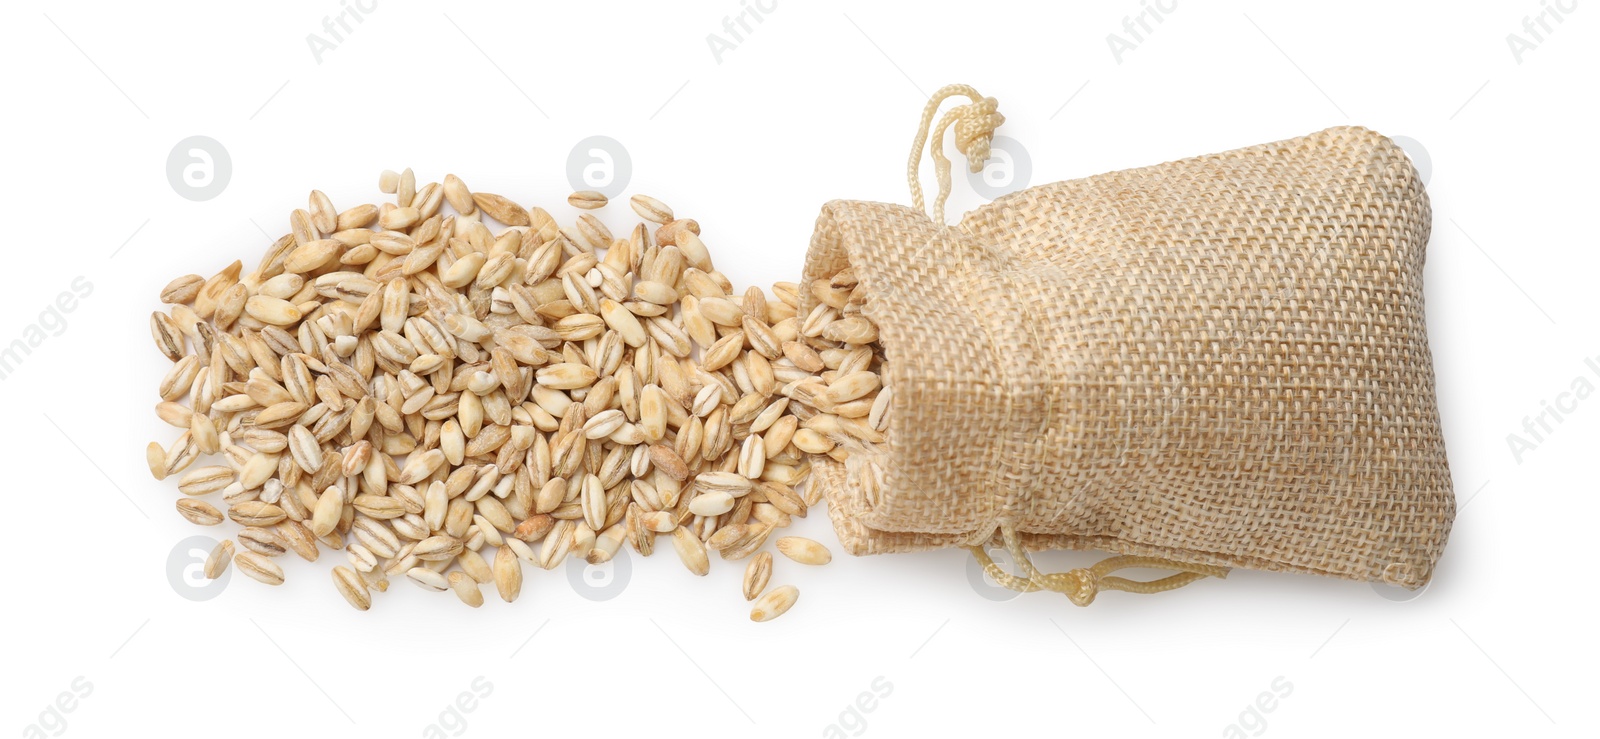 Photo of Burlap bag with raw pearl barley isolated on white, top view